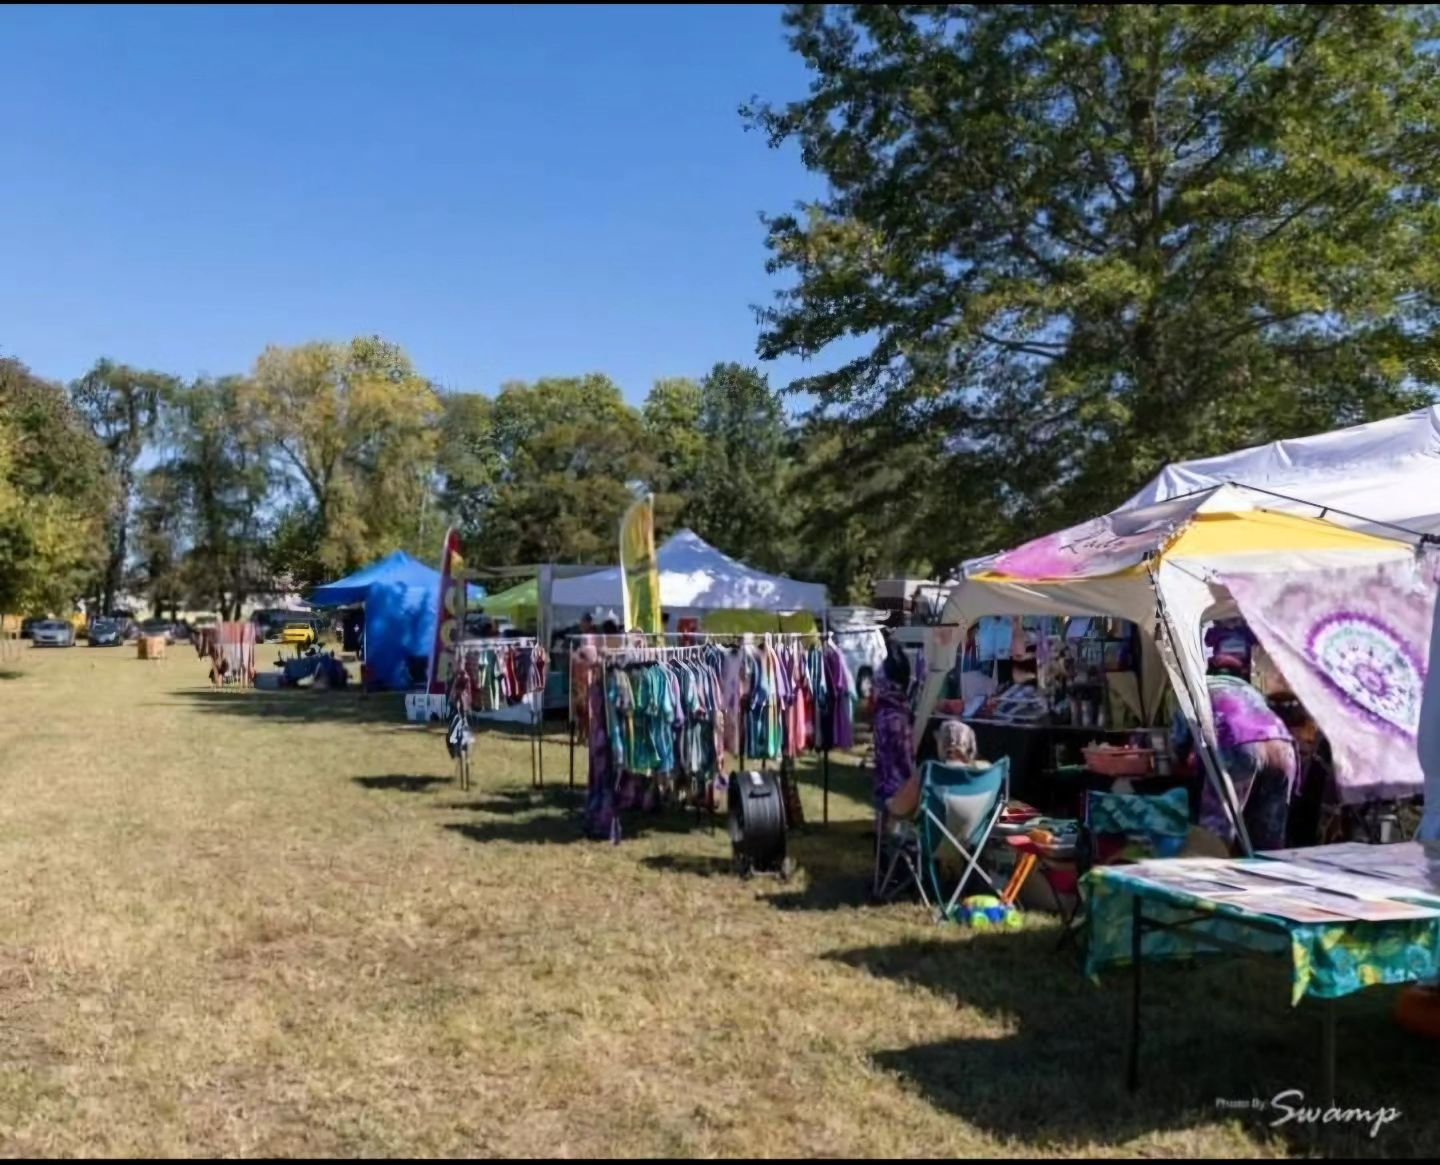 We're still accepting craft vendor applications and would love for you to vend with us this year! If you are interested, please fill out our vendor form on our website. 

📷 @gazettour_